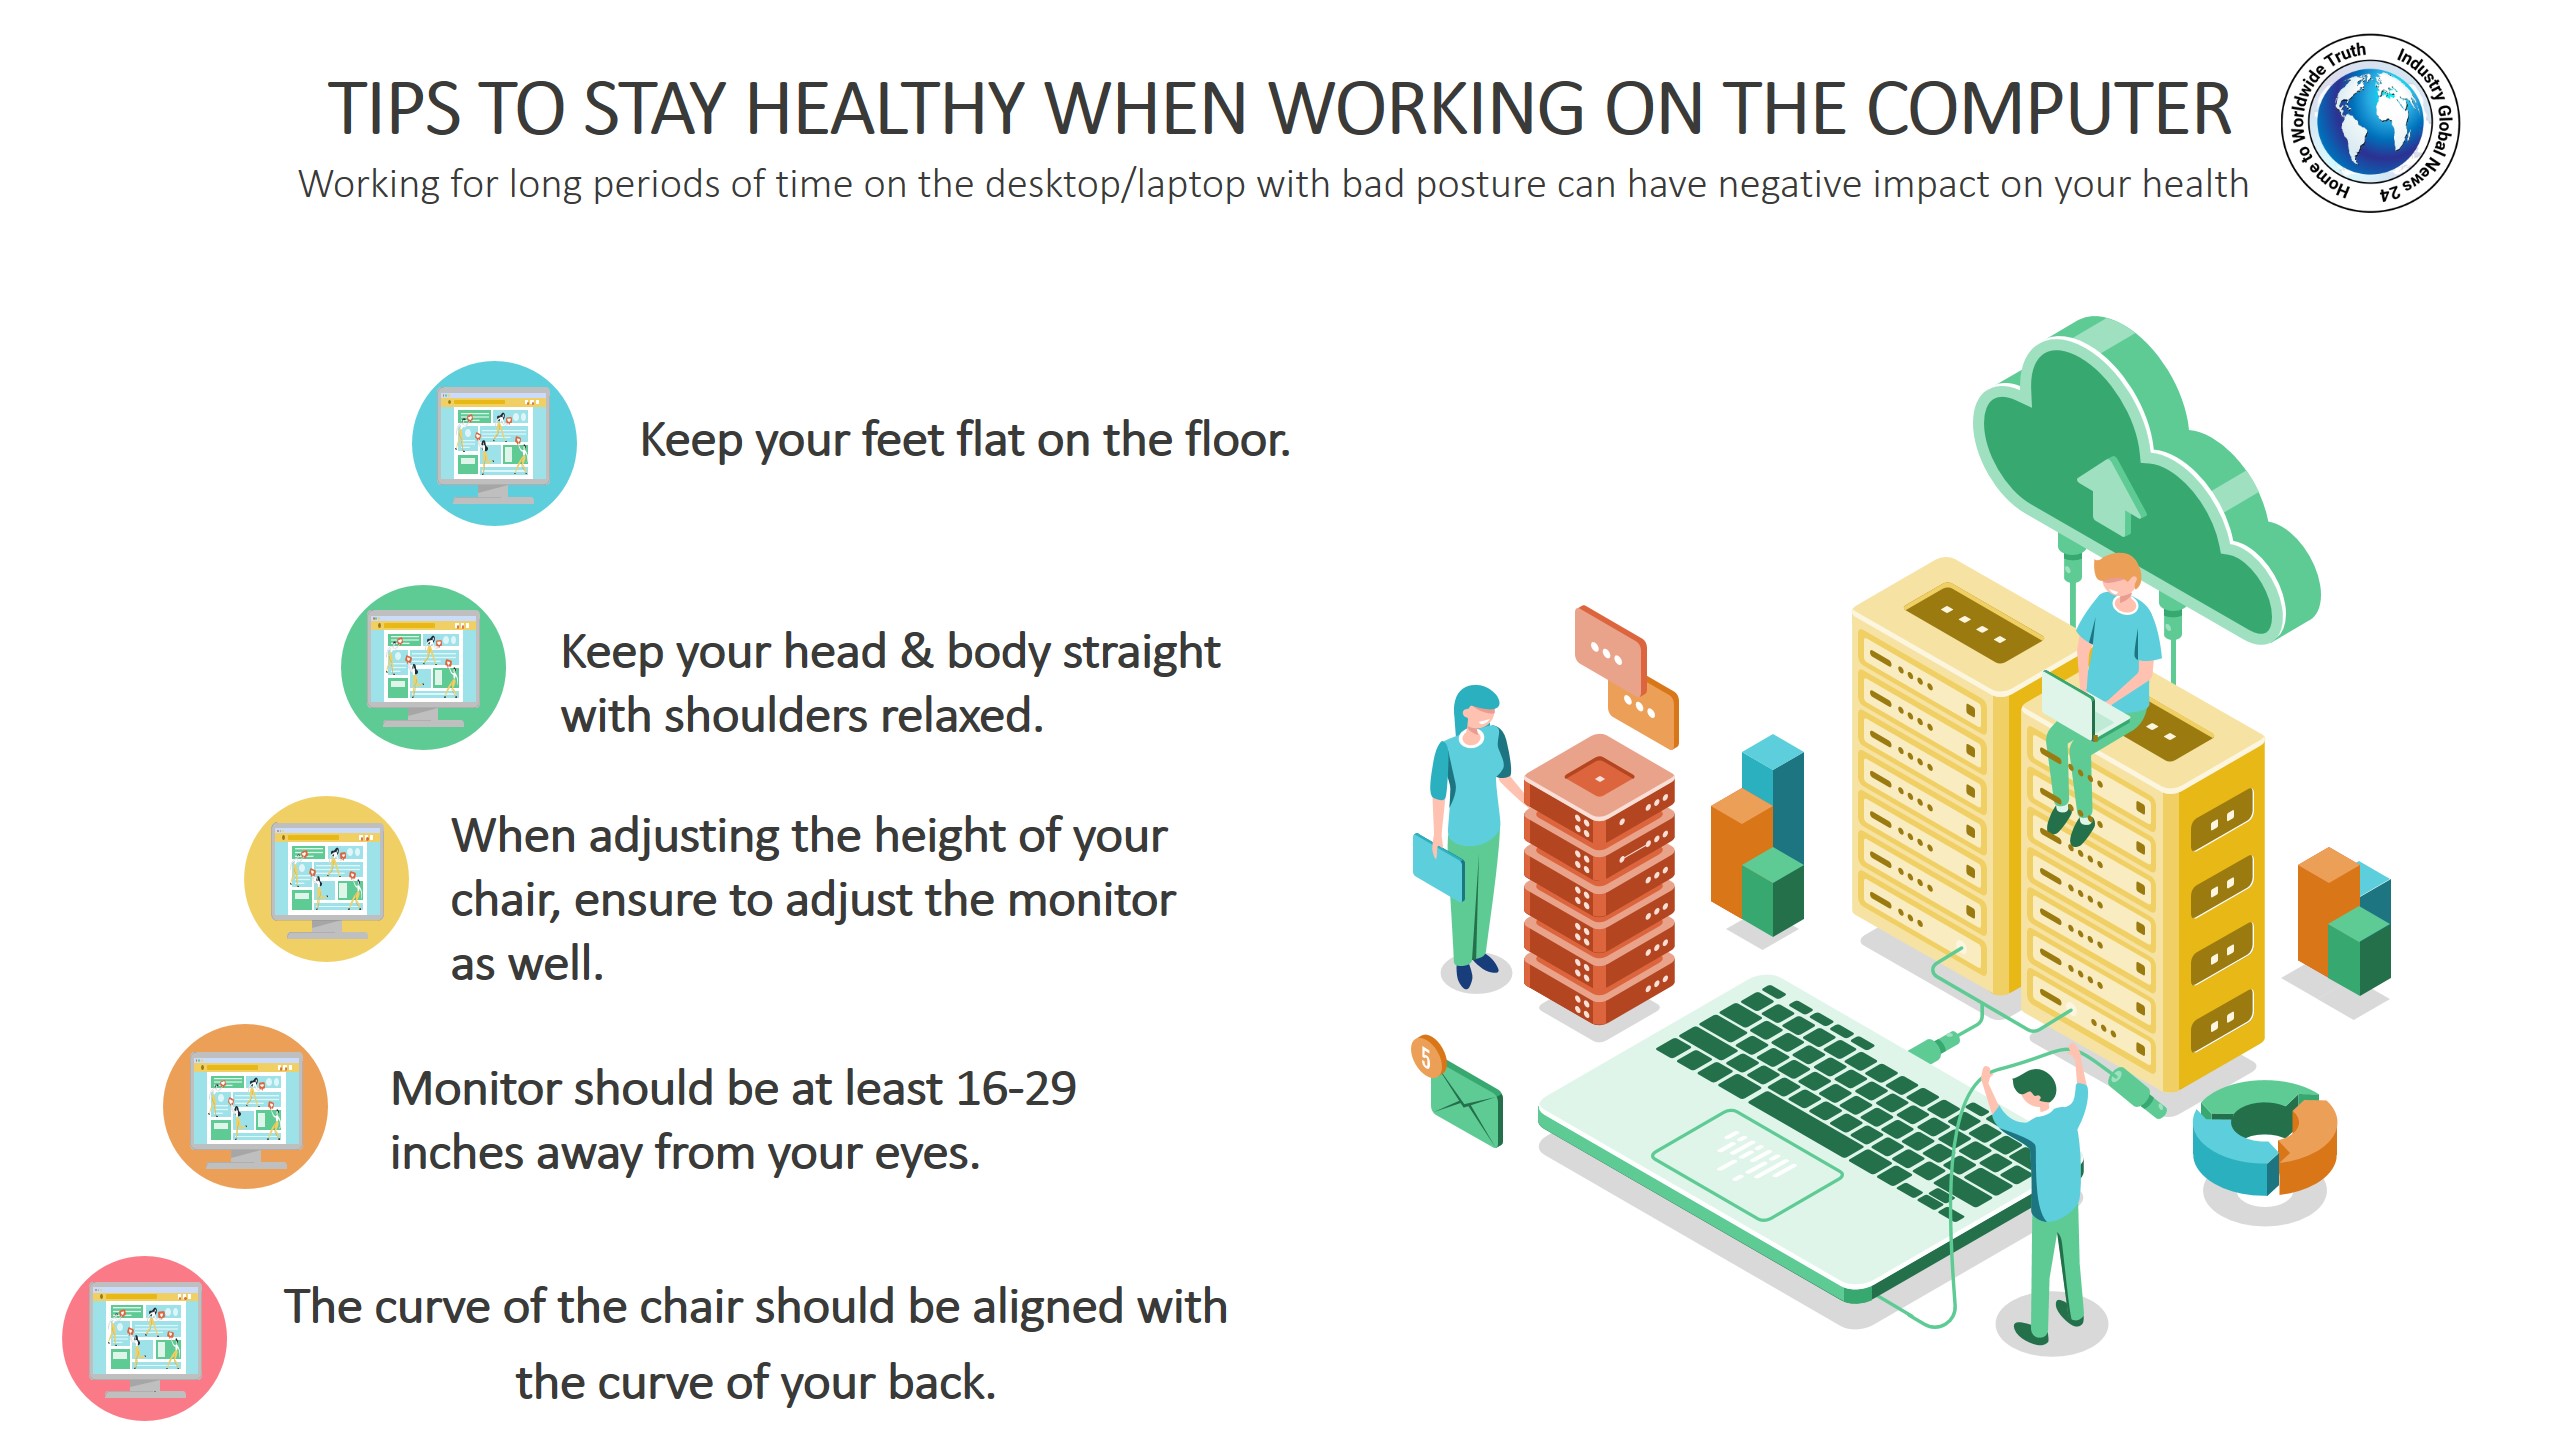 Tips to stay healthy when working on the computer